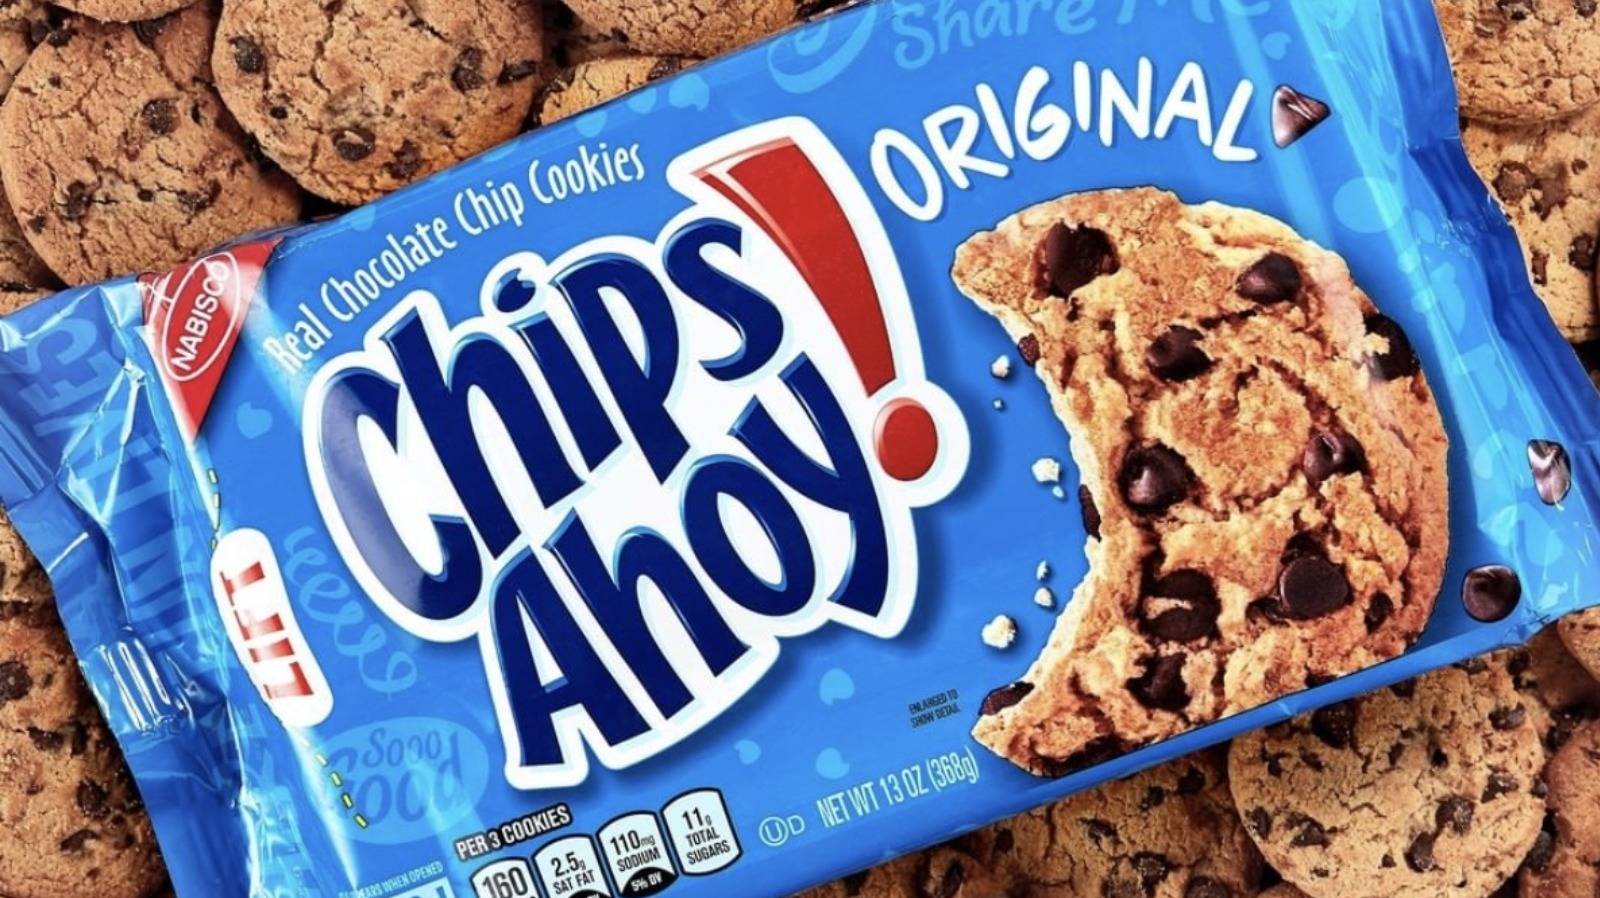 Chips Ahoy! Cookie label. The photo was taken for this study.